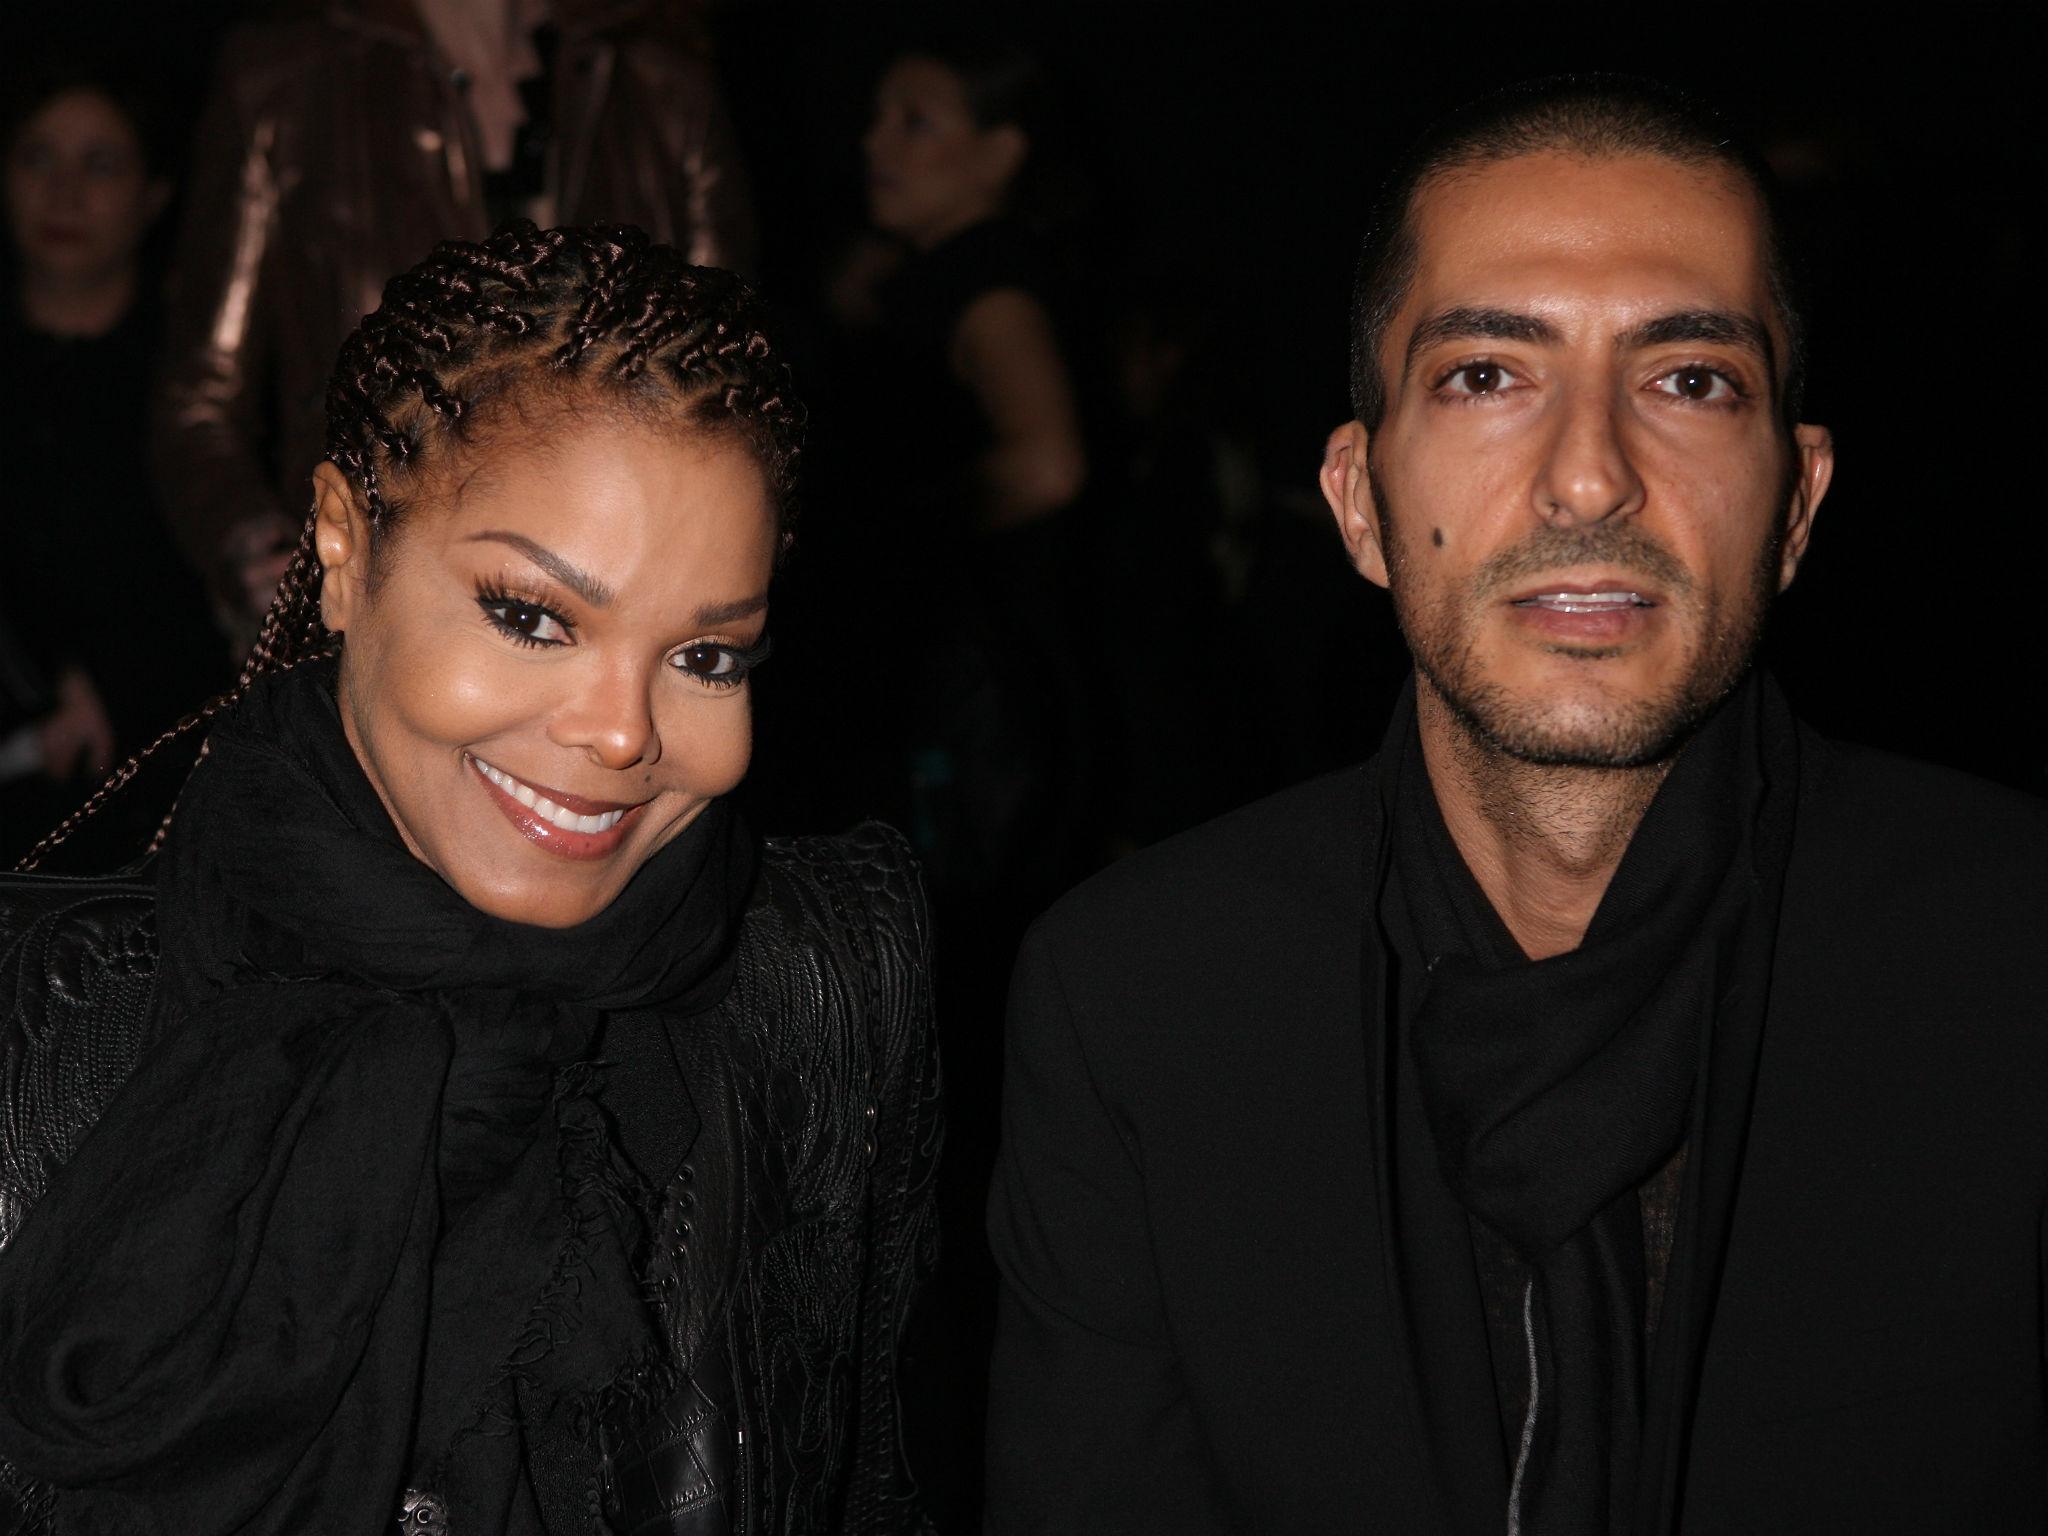 Jackson and her husband Wissam al Mana welcomed a son this week